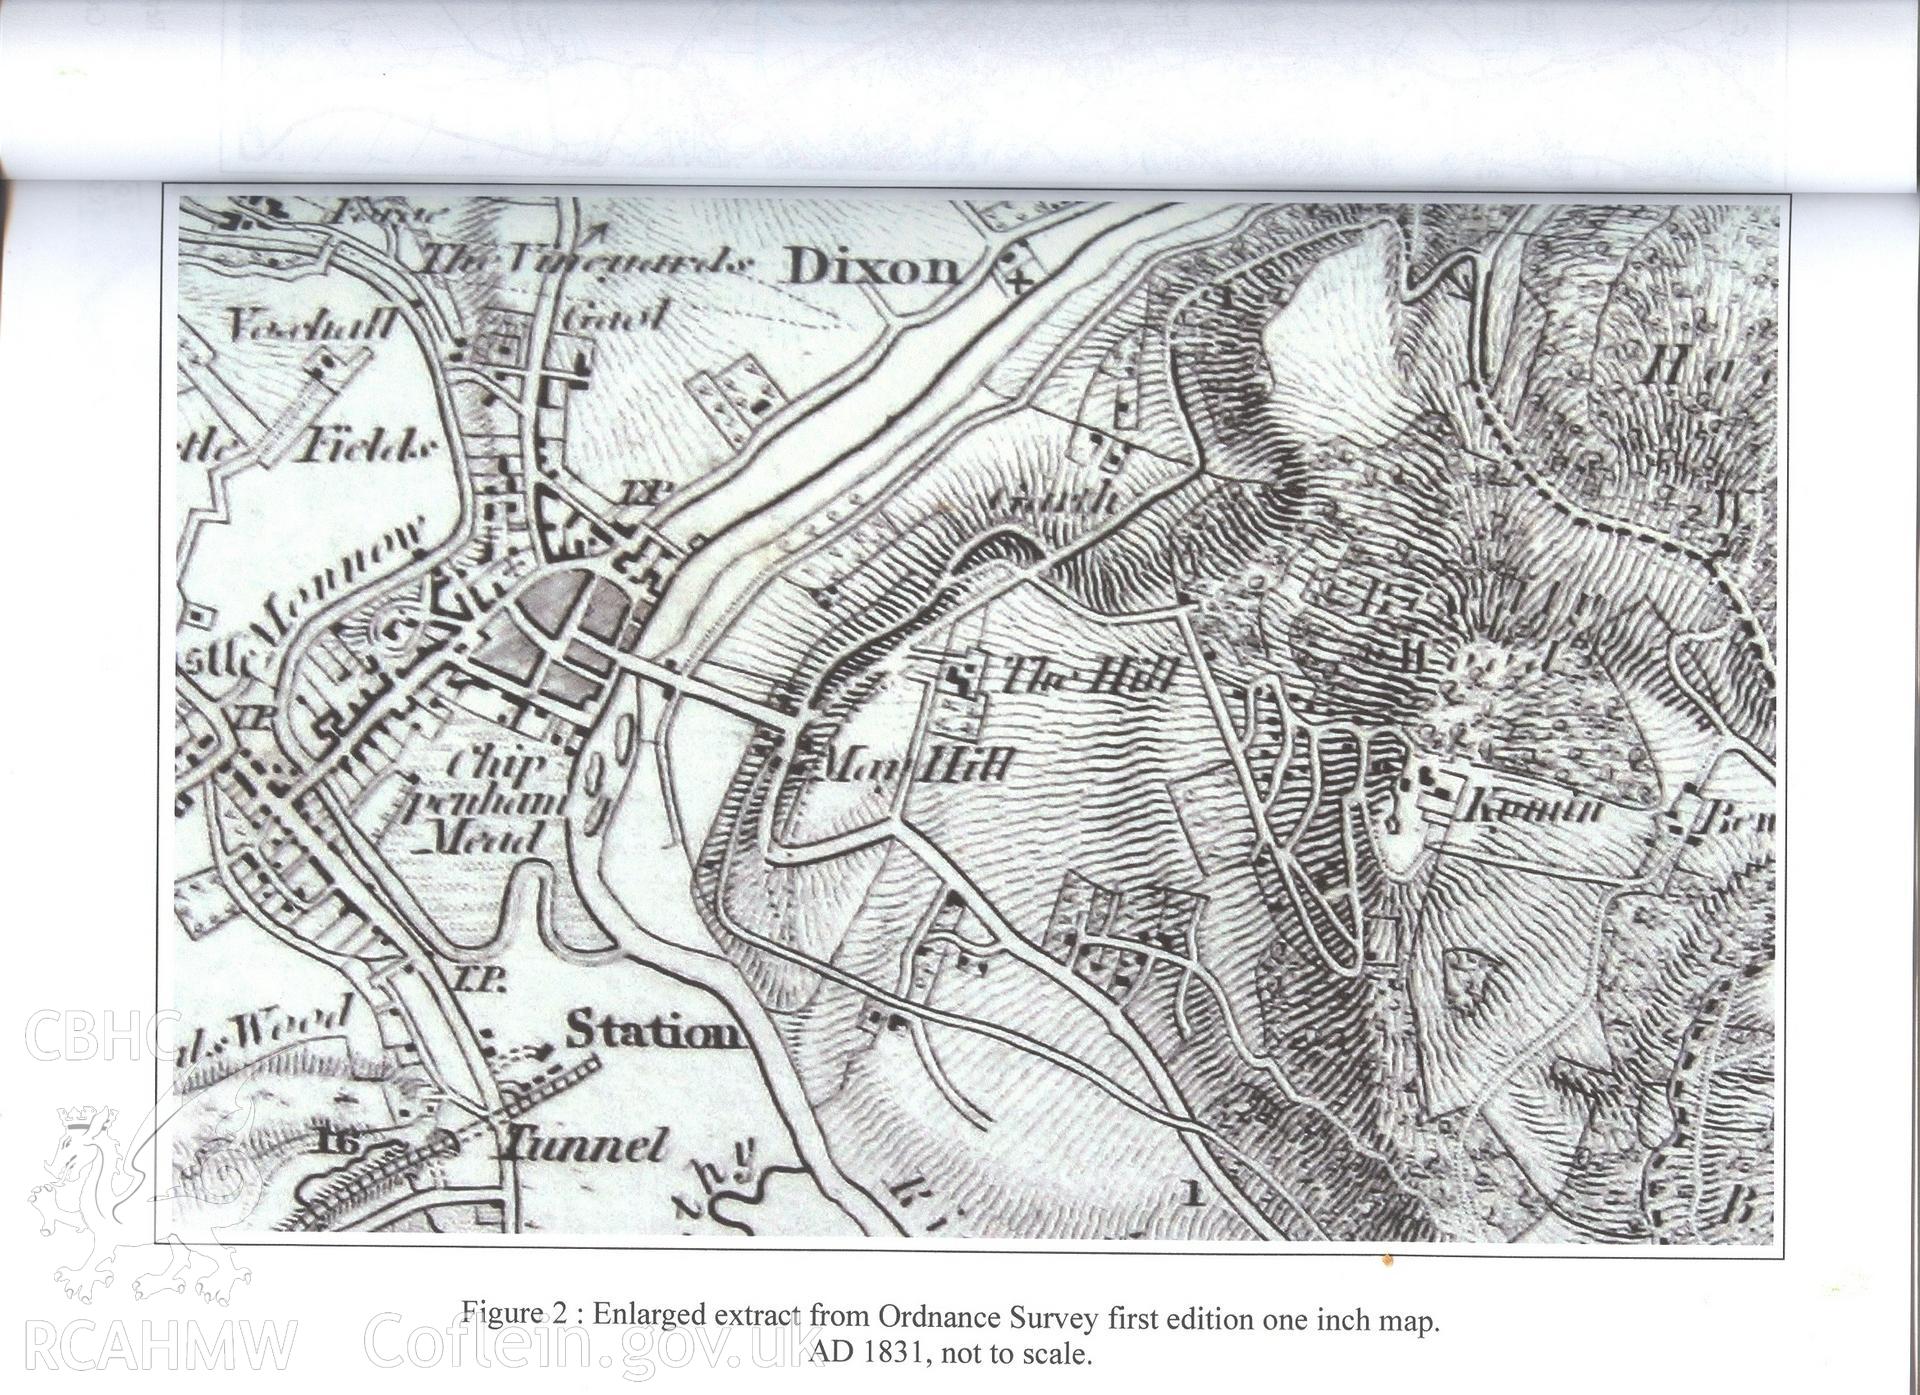 Digital copy of part of an Ordnance Survey first edition one inch map, showing Kymin Hill.